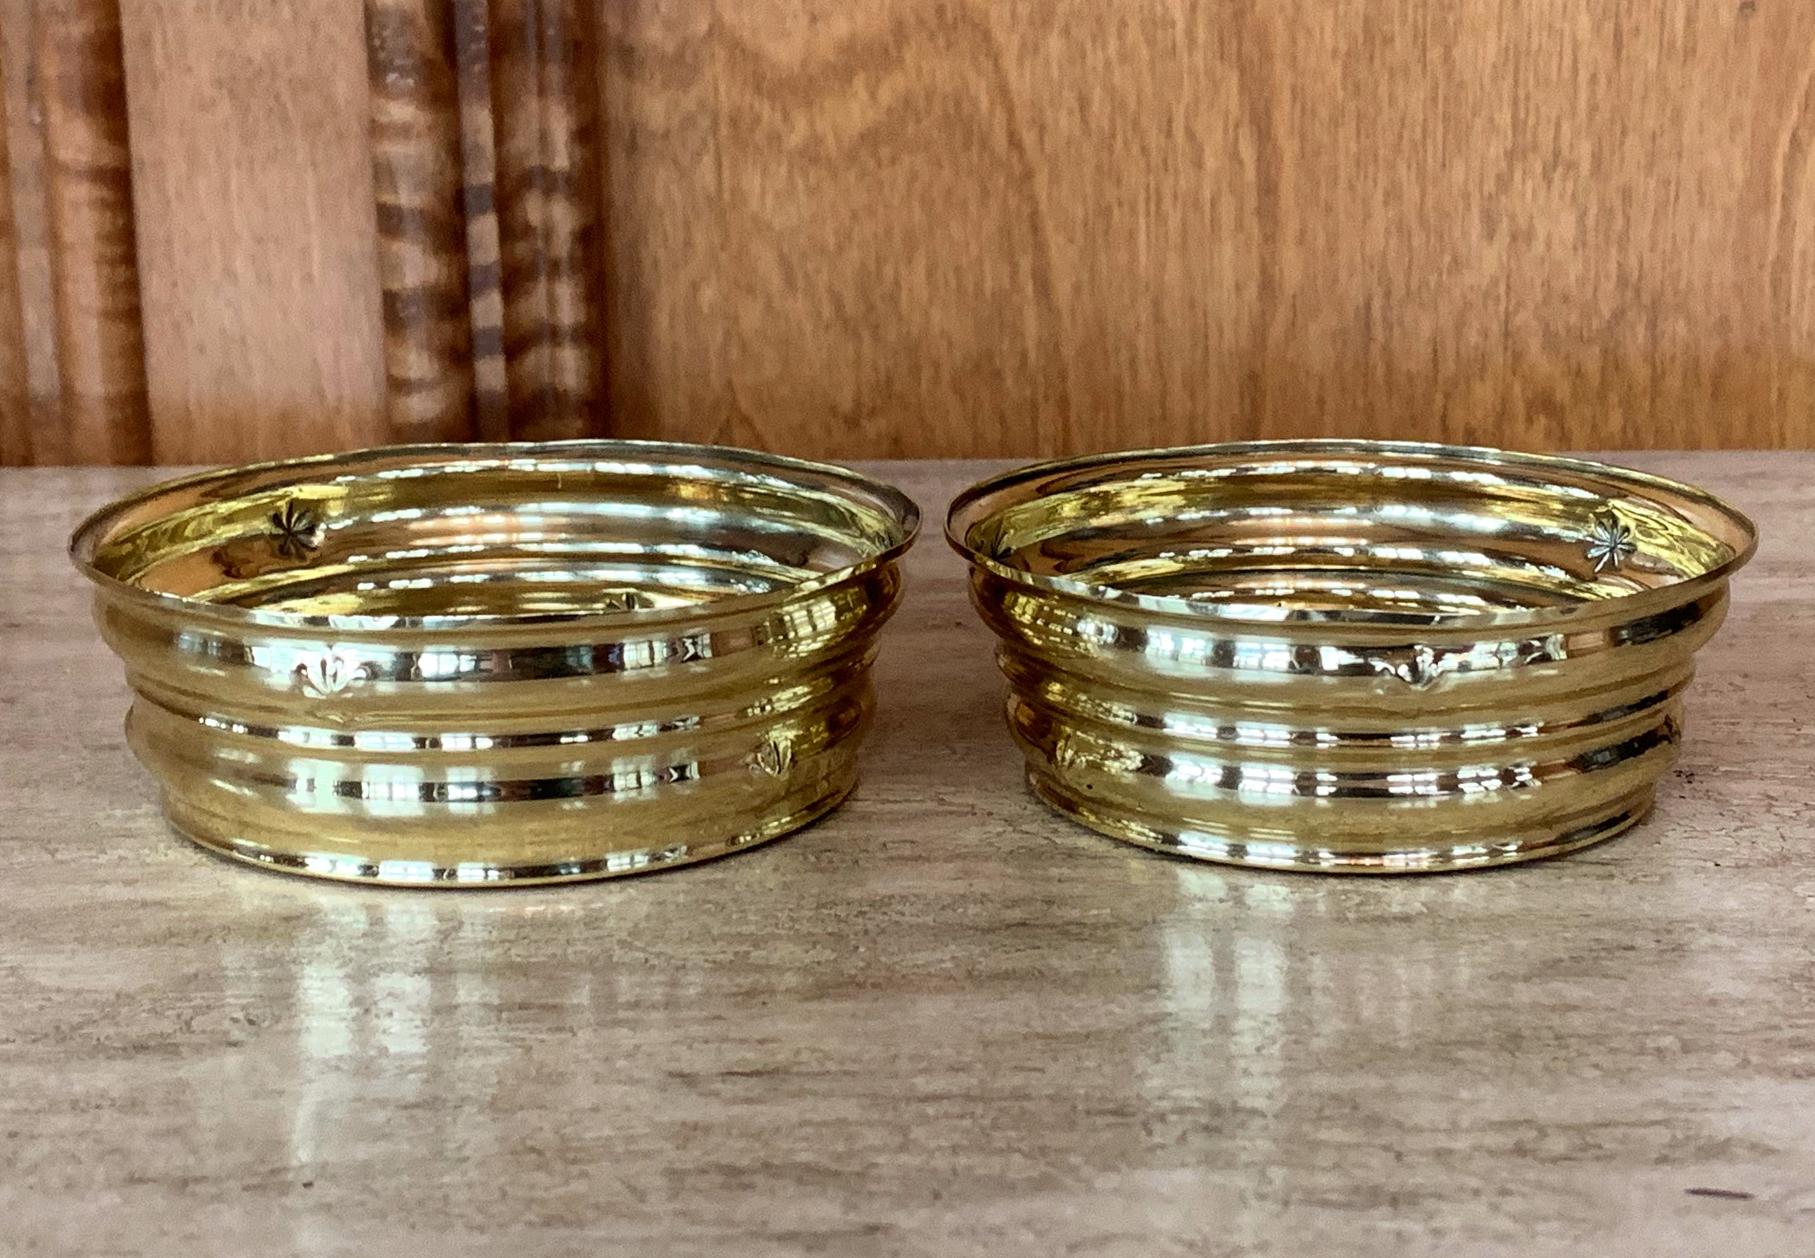 A pair of brass bowl in stepped concentric form designed by Dagobert Peche (Austrian, 1887-1923) and for Wiener Werkstatte circa 1910s-1920s. In the iconic style of Vienna Secession, these small bowls take a geometrical form and were subtly